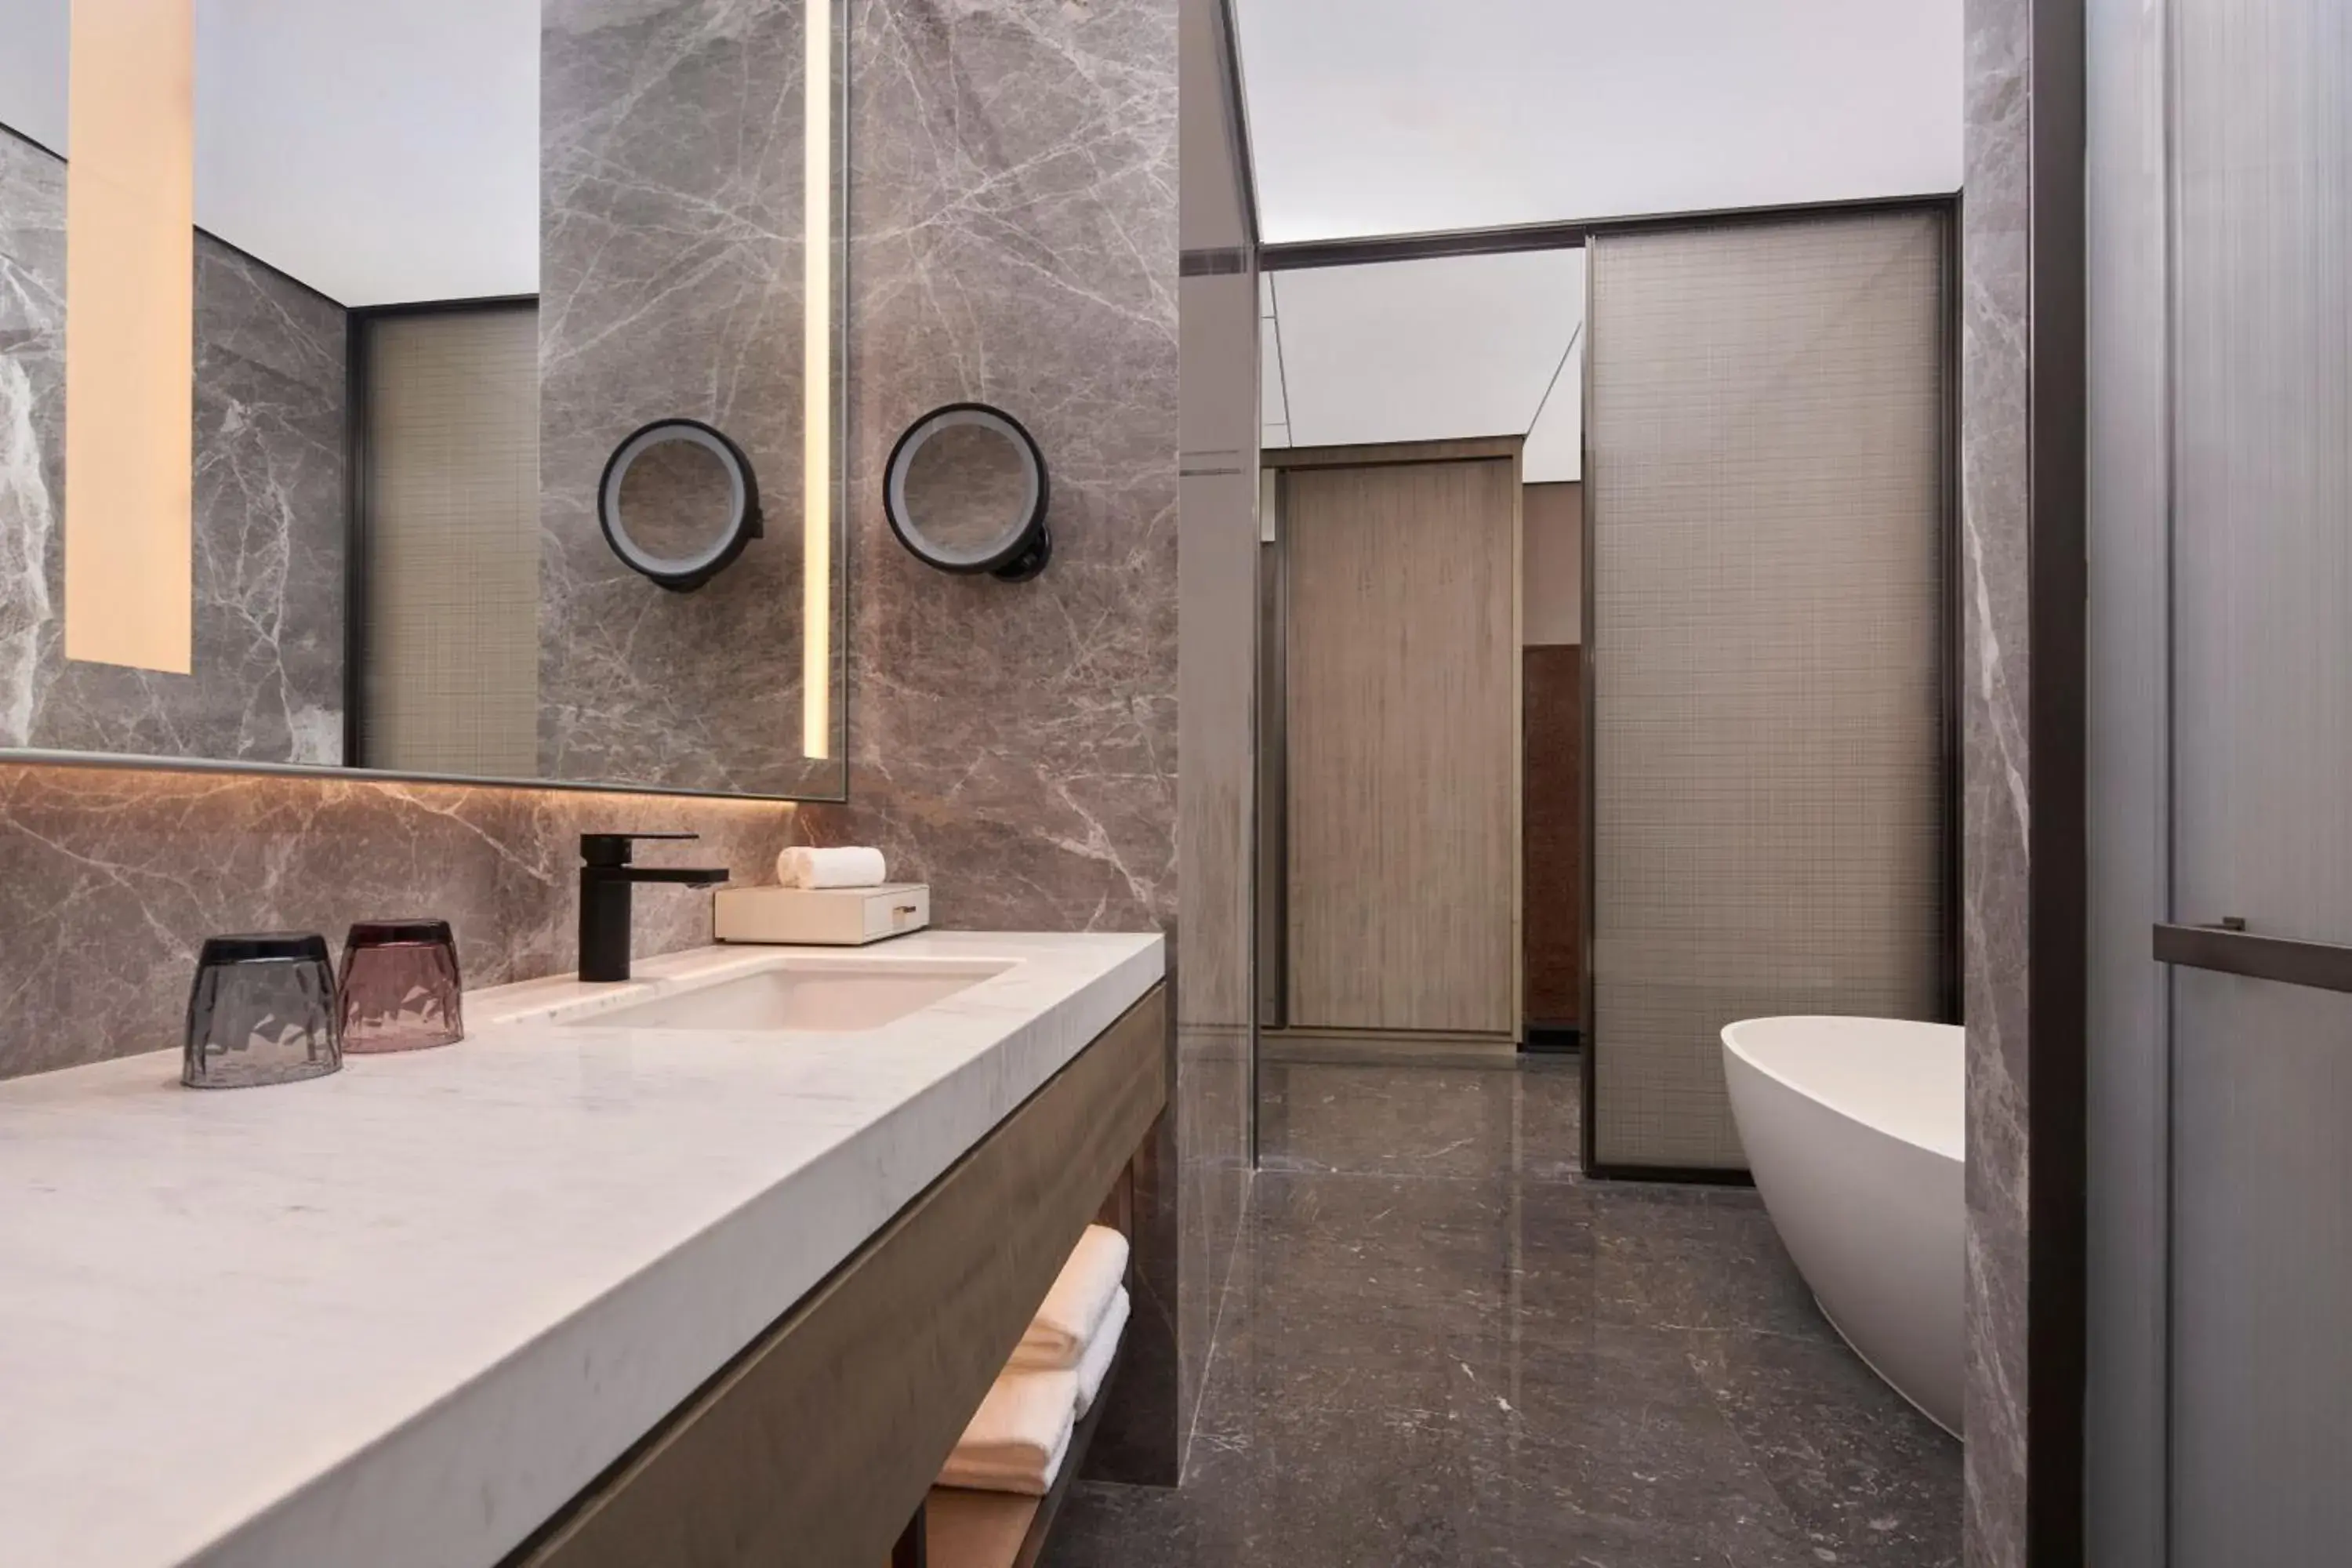 Bathroom in Tianjin Marriott Hotel National Convention and Exhibition Center